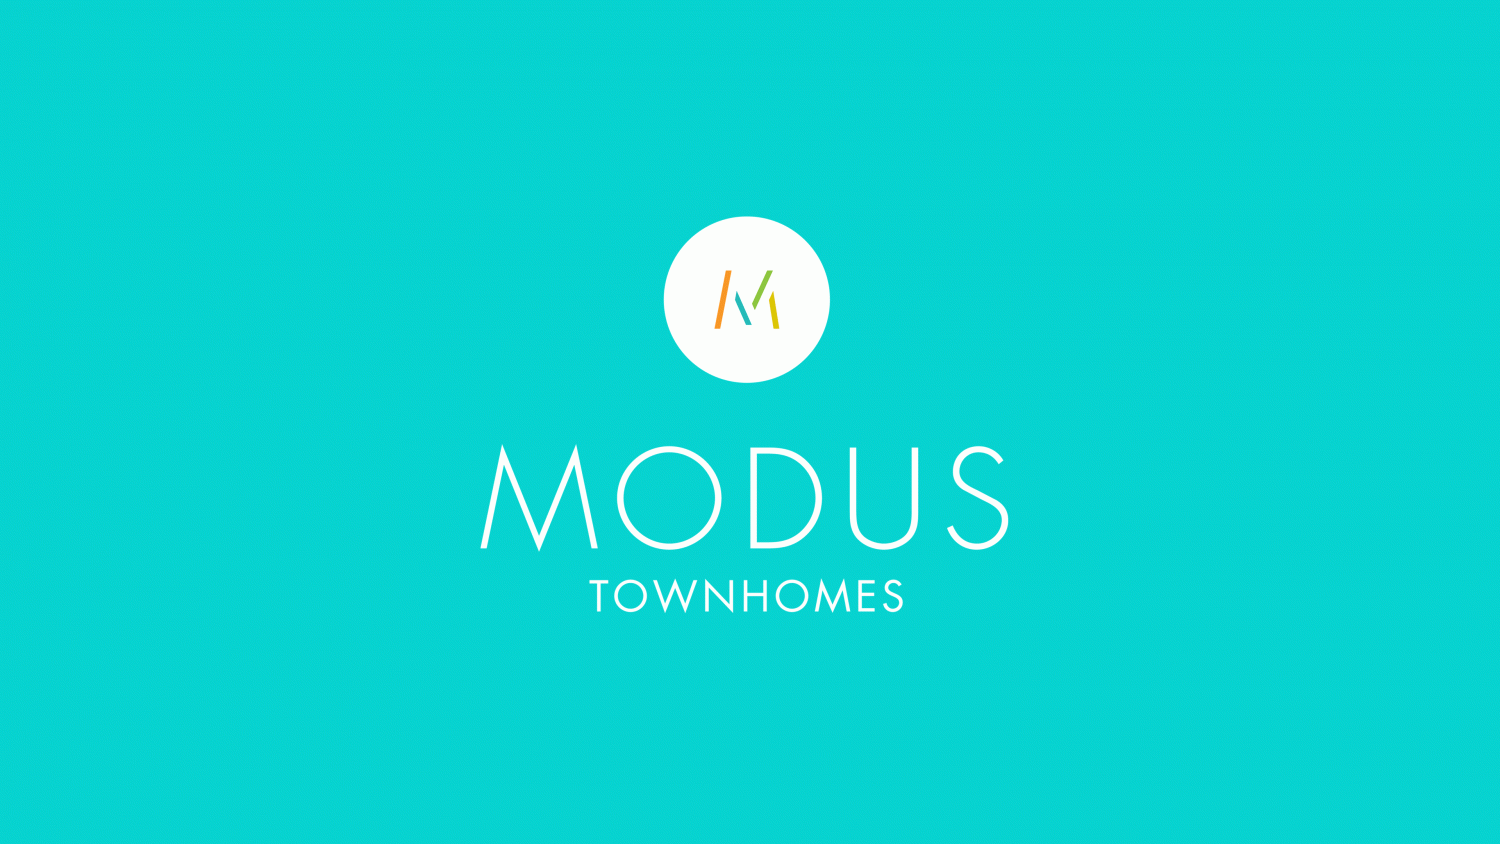 Modus Townhomes